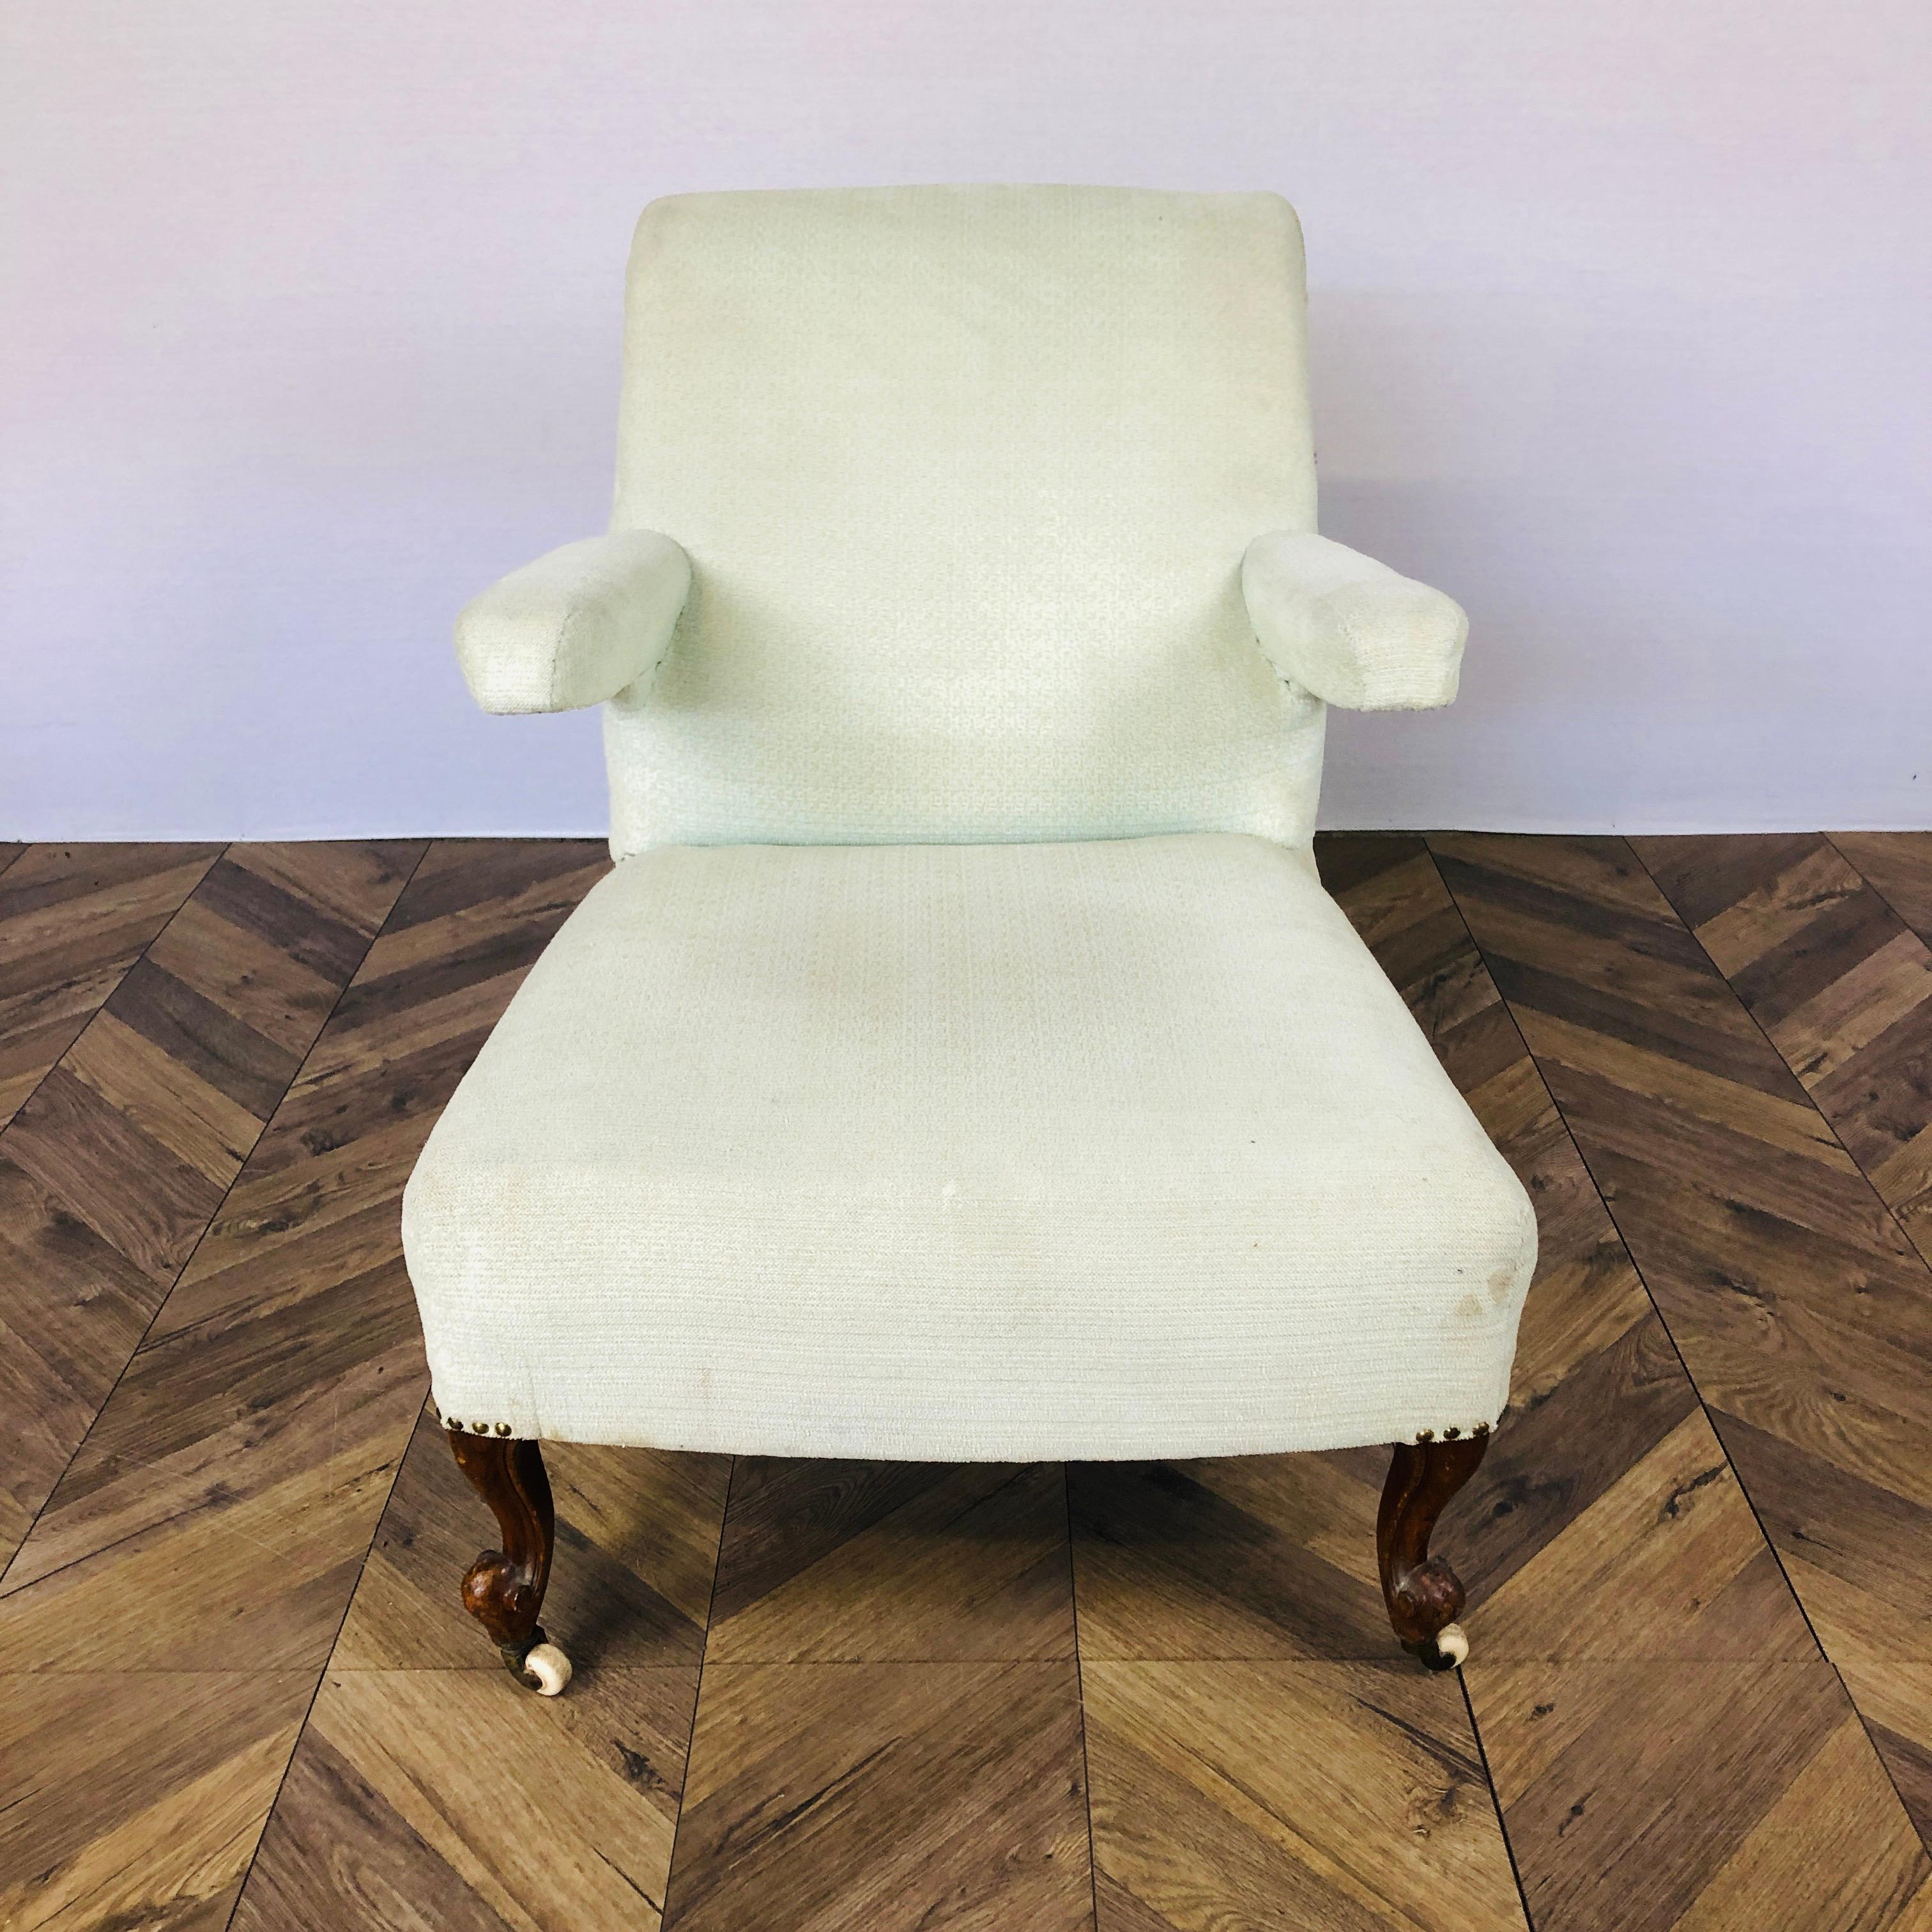 A Well Proportioned, Unusual Victorian Salon or Medical Armchair. Circa 1850s. 

The chair features a slanted back with scrolled / rolled top and floating armrests. The chair sits on original castors and 4 ornate legs.

The pale green / beige